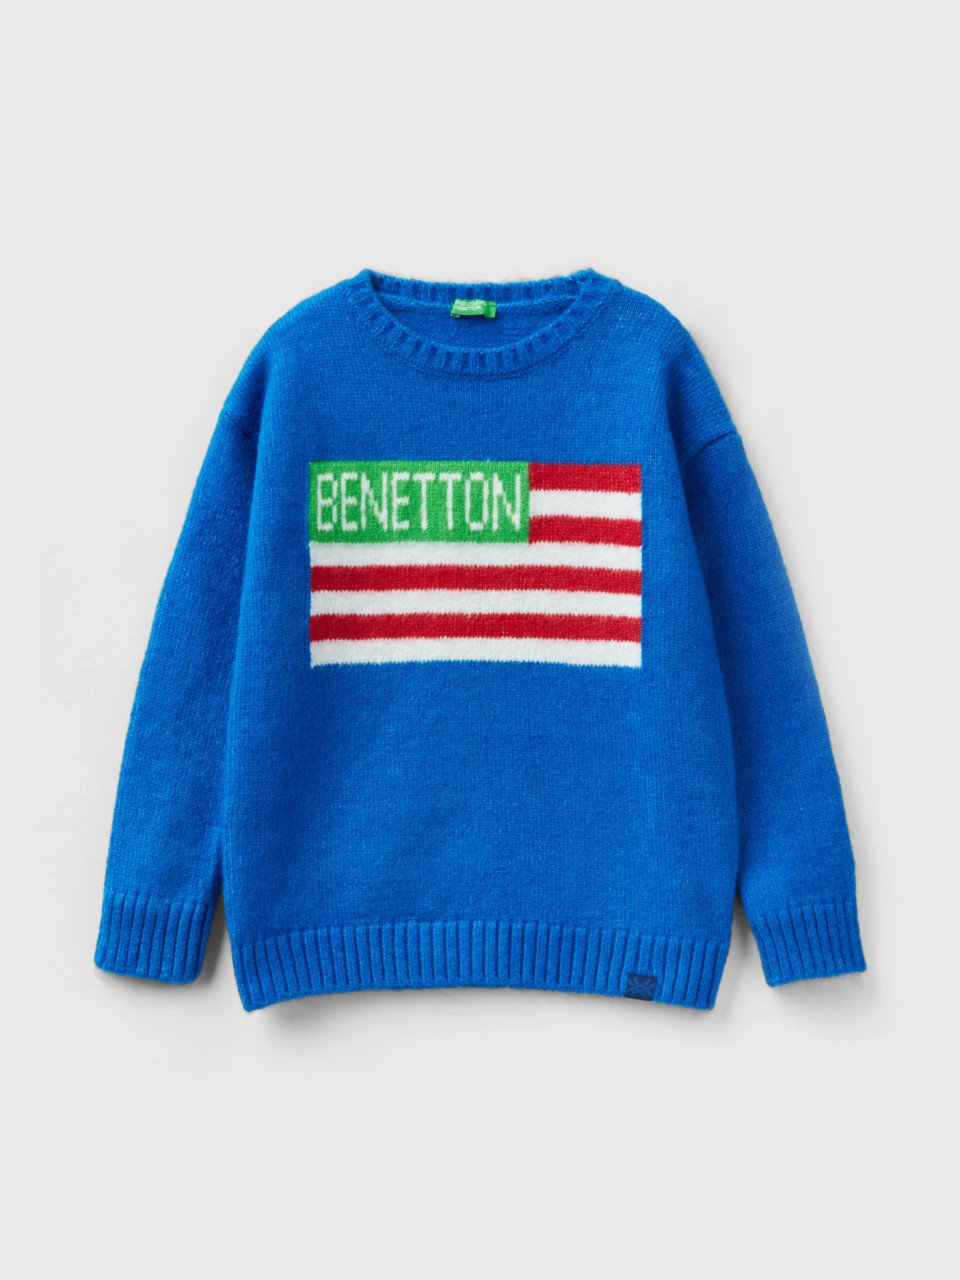 Benetton, Sweater With Flag Inlay, Bright Blue, Kids